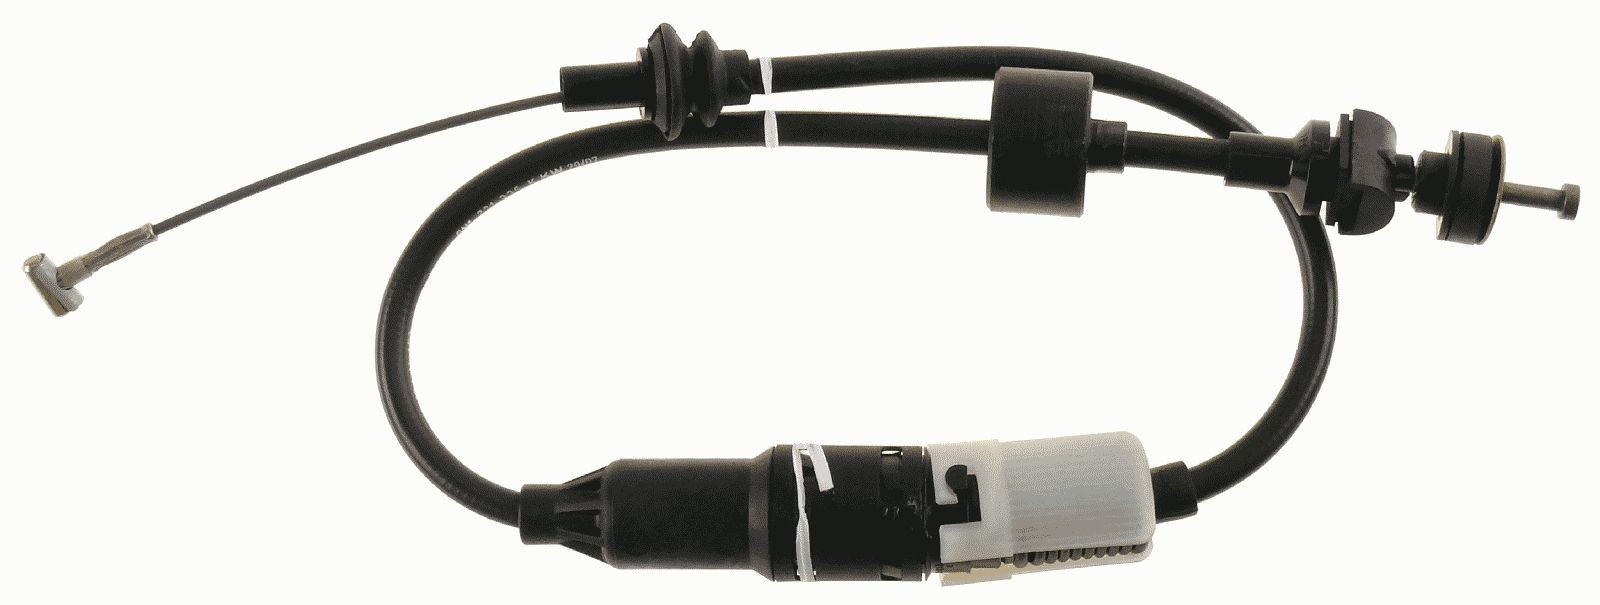 OEM-quality SACHS 3074 003 346 Clutch Cable